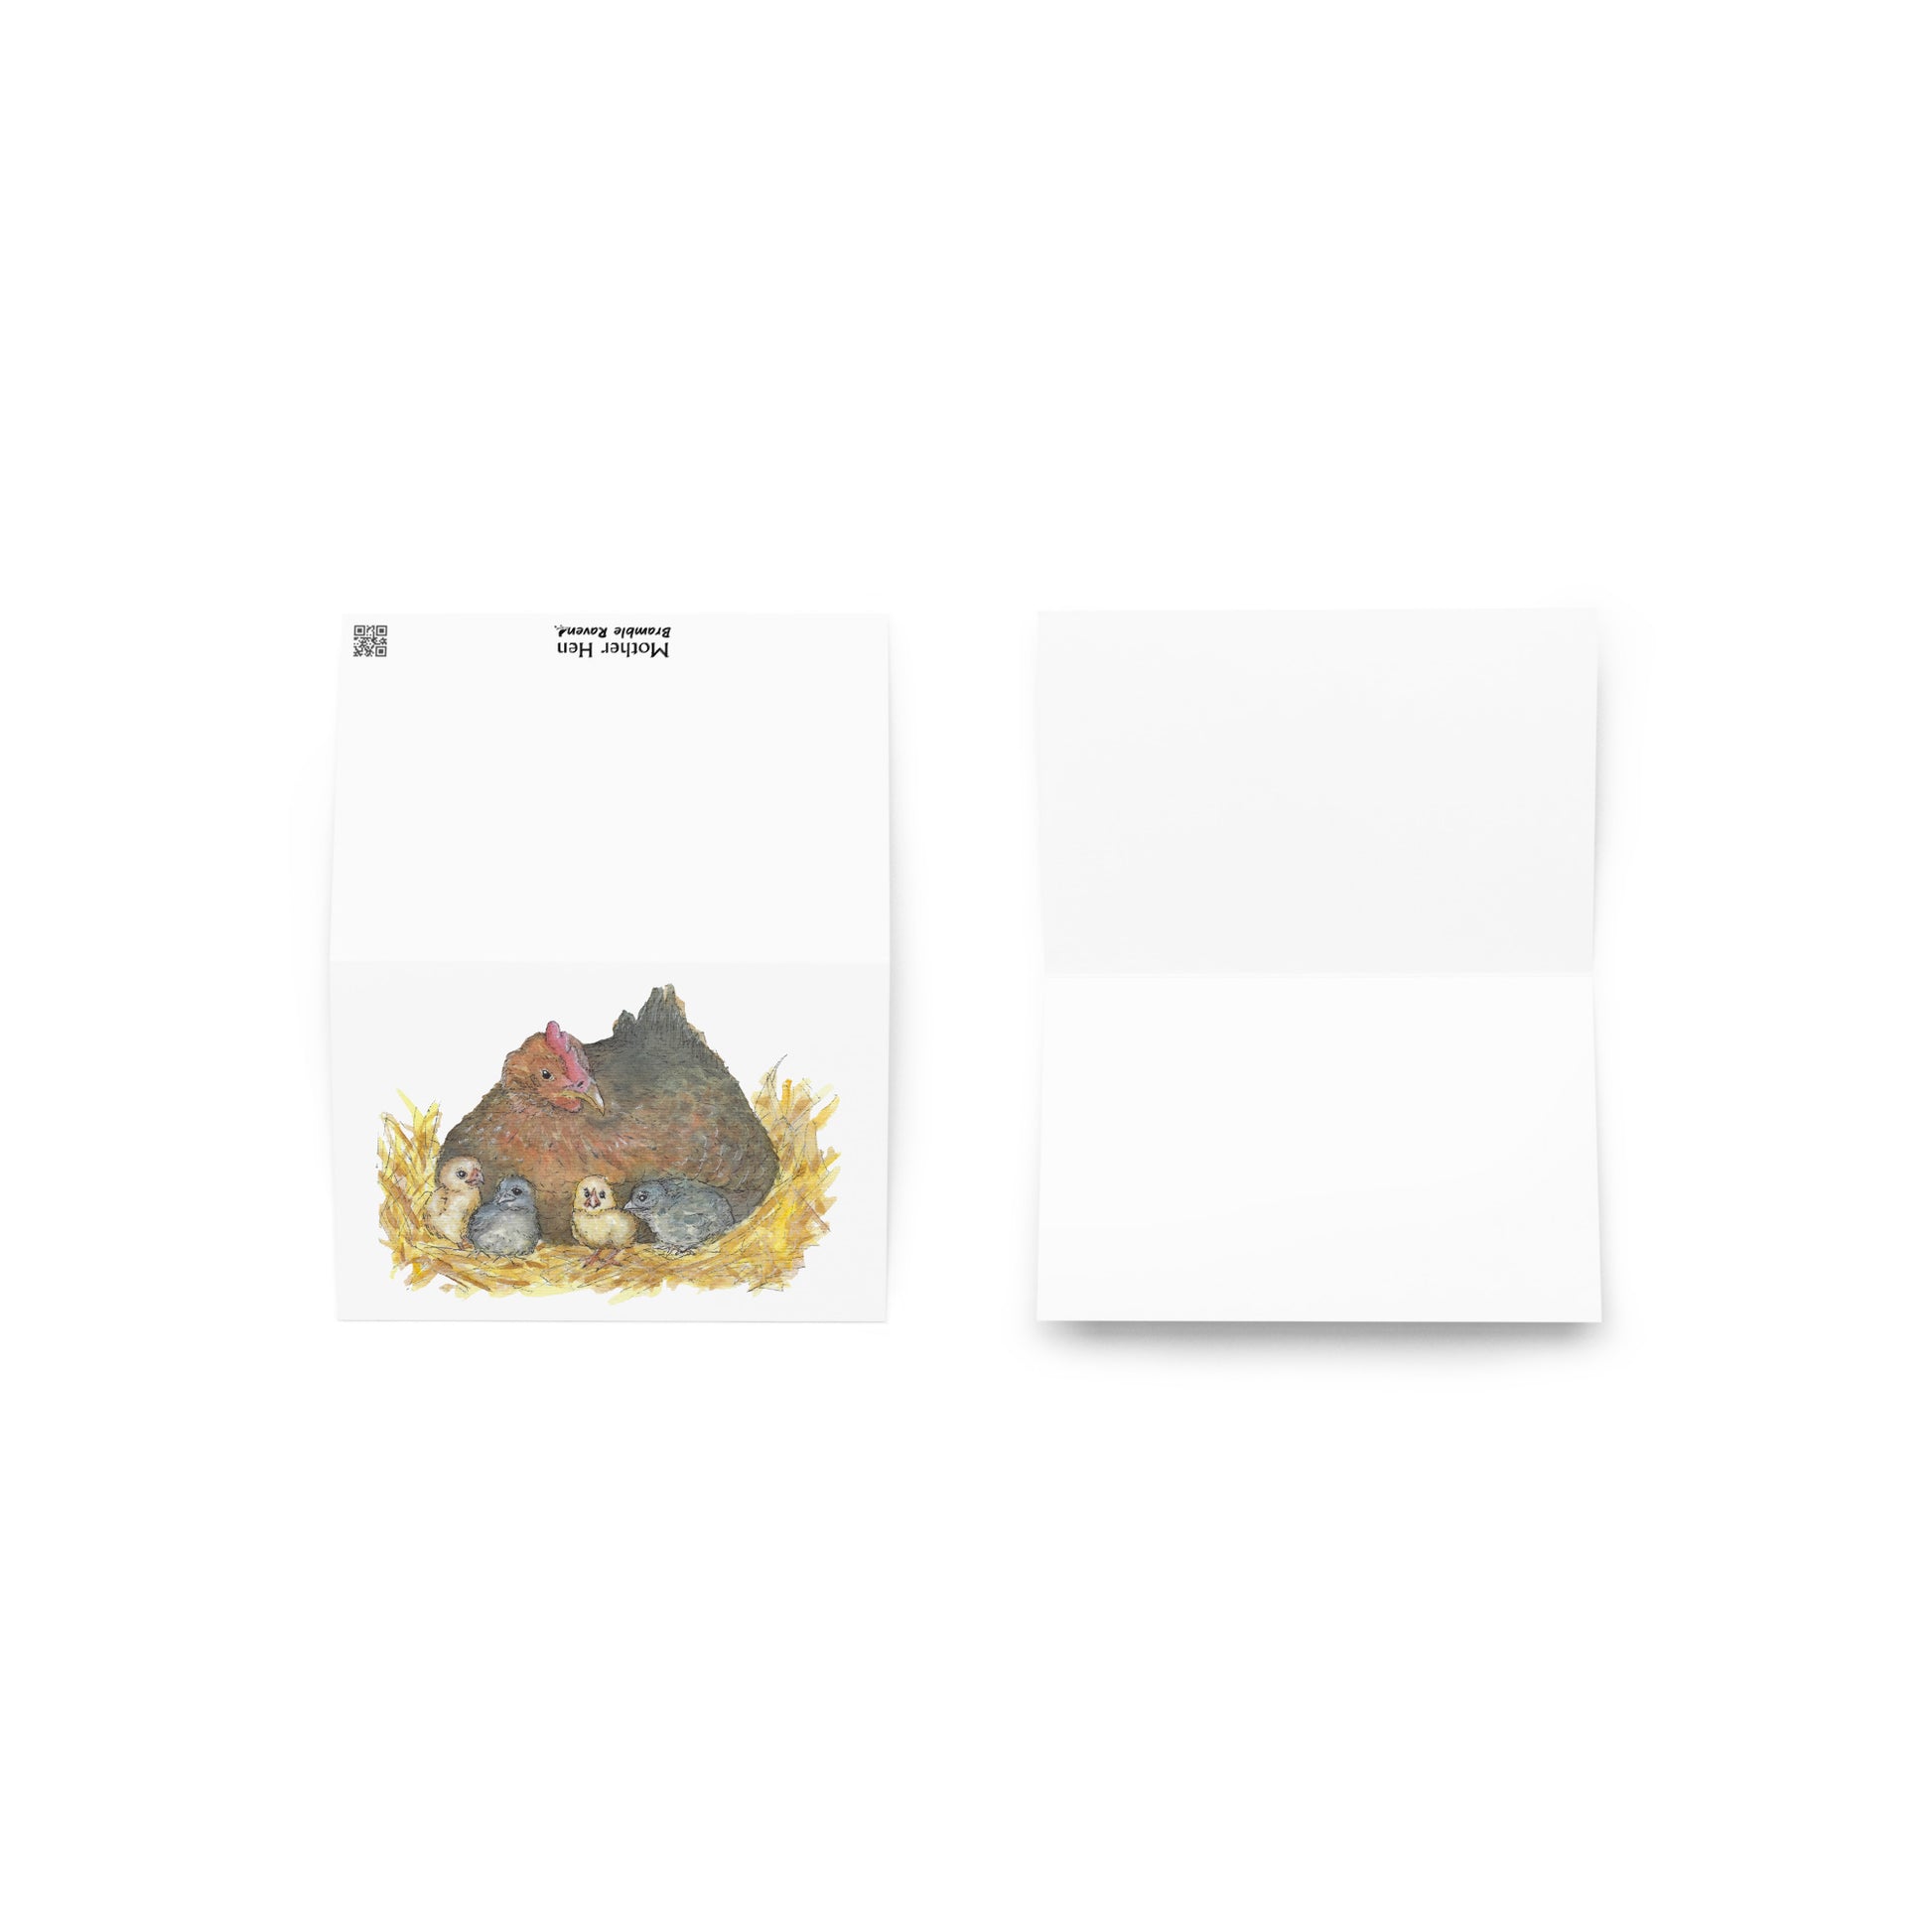 4 by 6 inch greeting card and envelope. Front features watercolor print of a mother hen and four chicks in a nest. Inside is blank. Shows front, back, and inside of card.